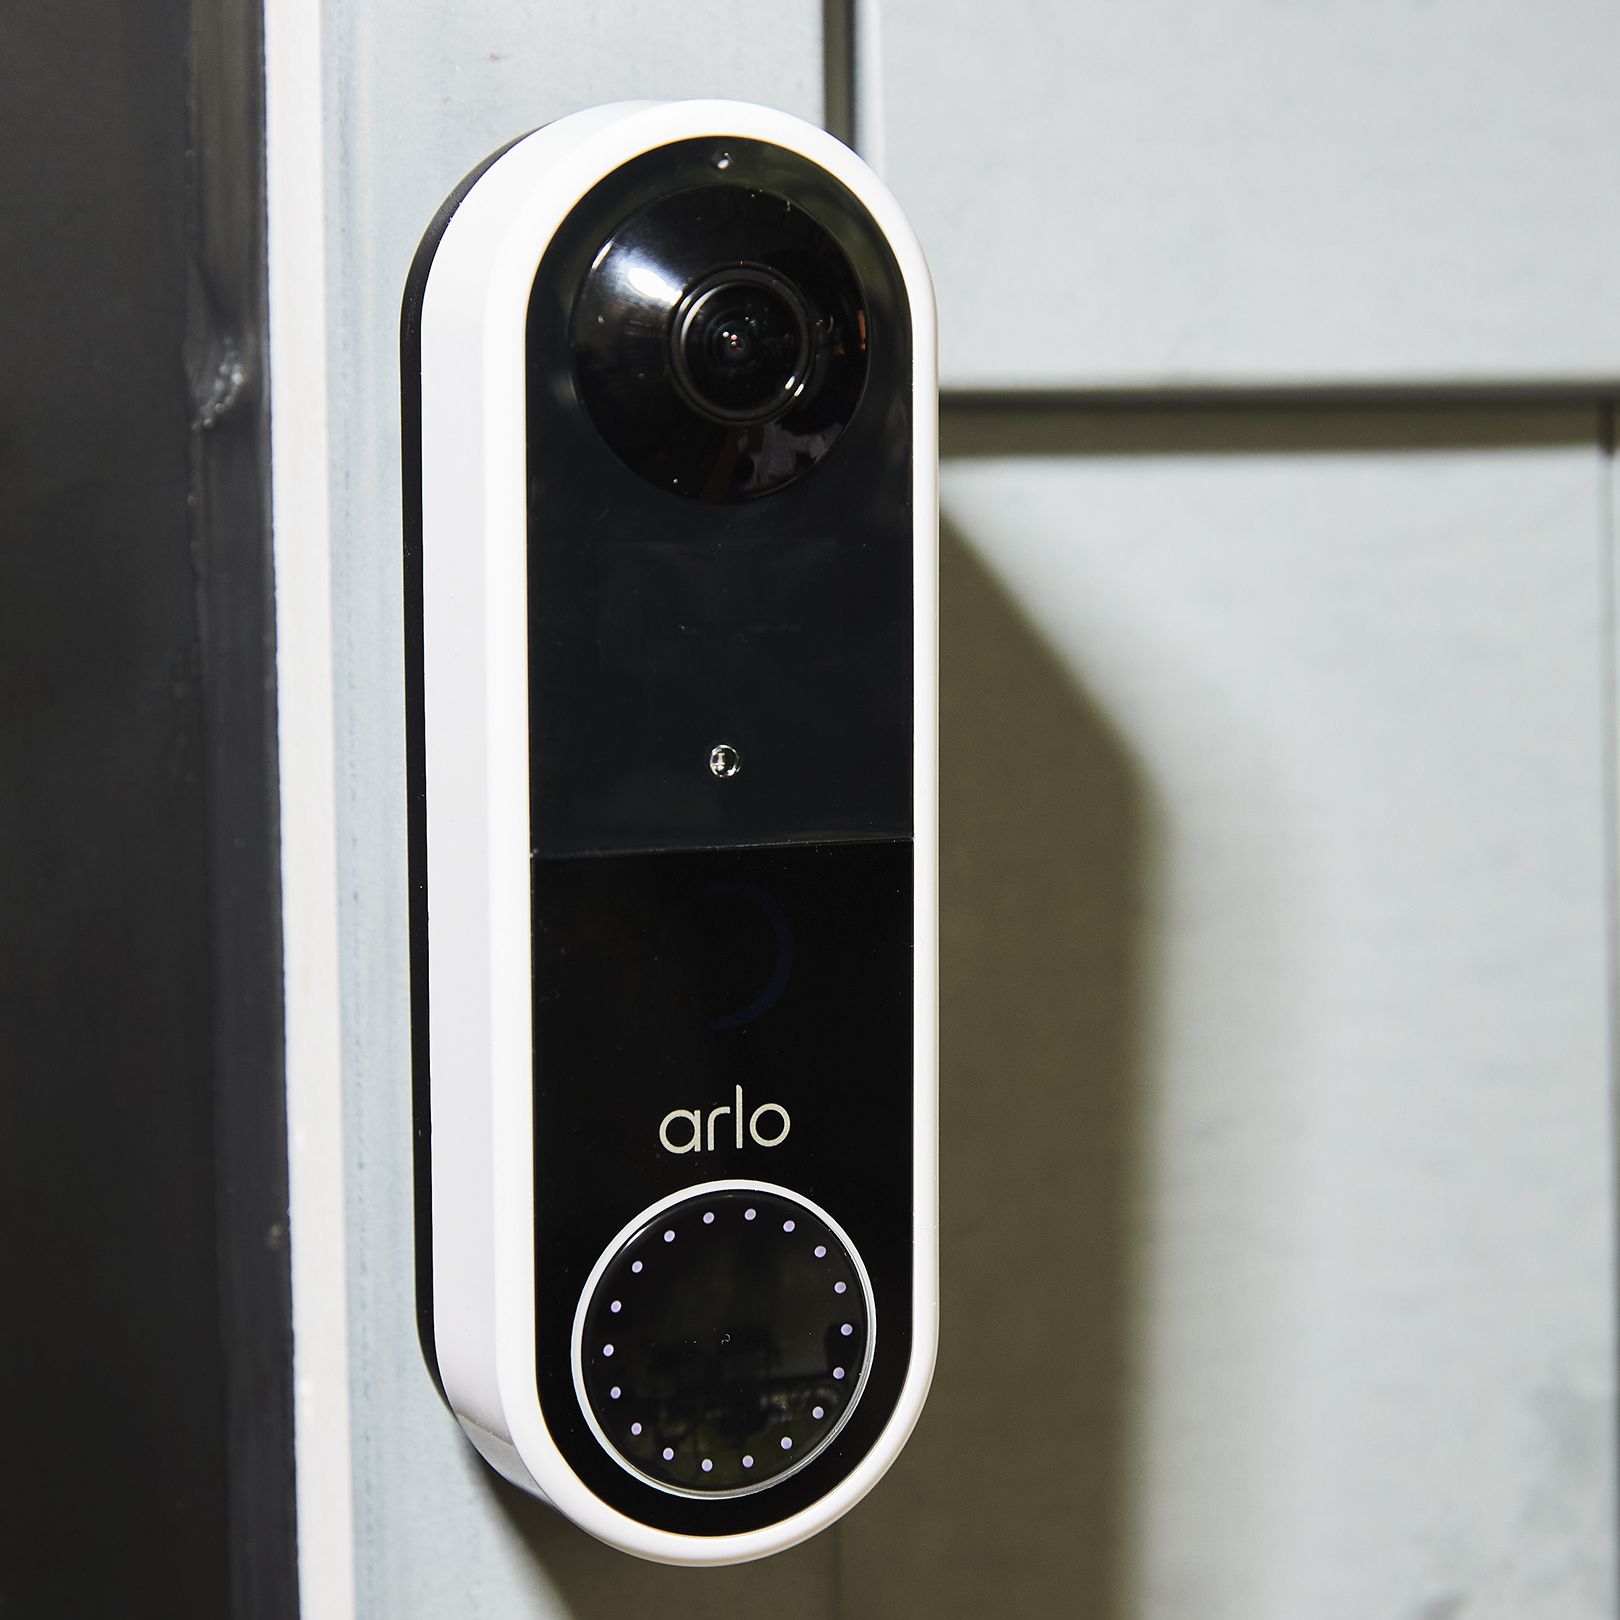 Keep an Eye on Your Home With The Best Doorbell Cameras We've Tried